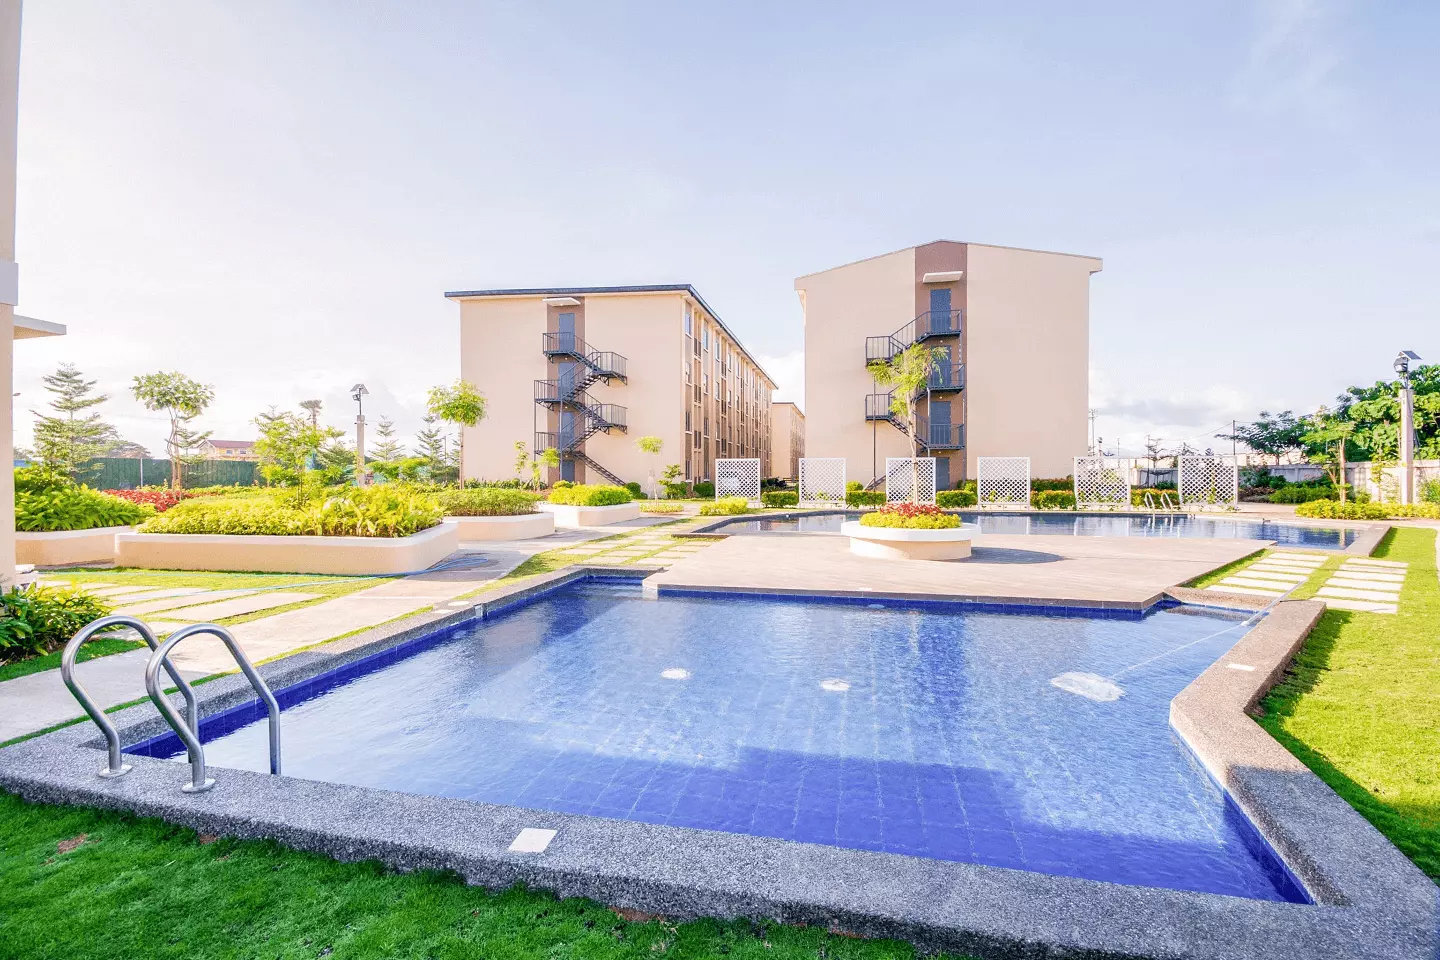 Bria Homes brings modern and picturesque condo living to Cebu with new Mactan development